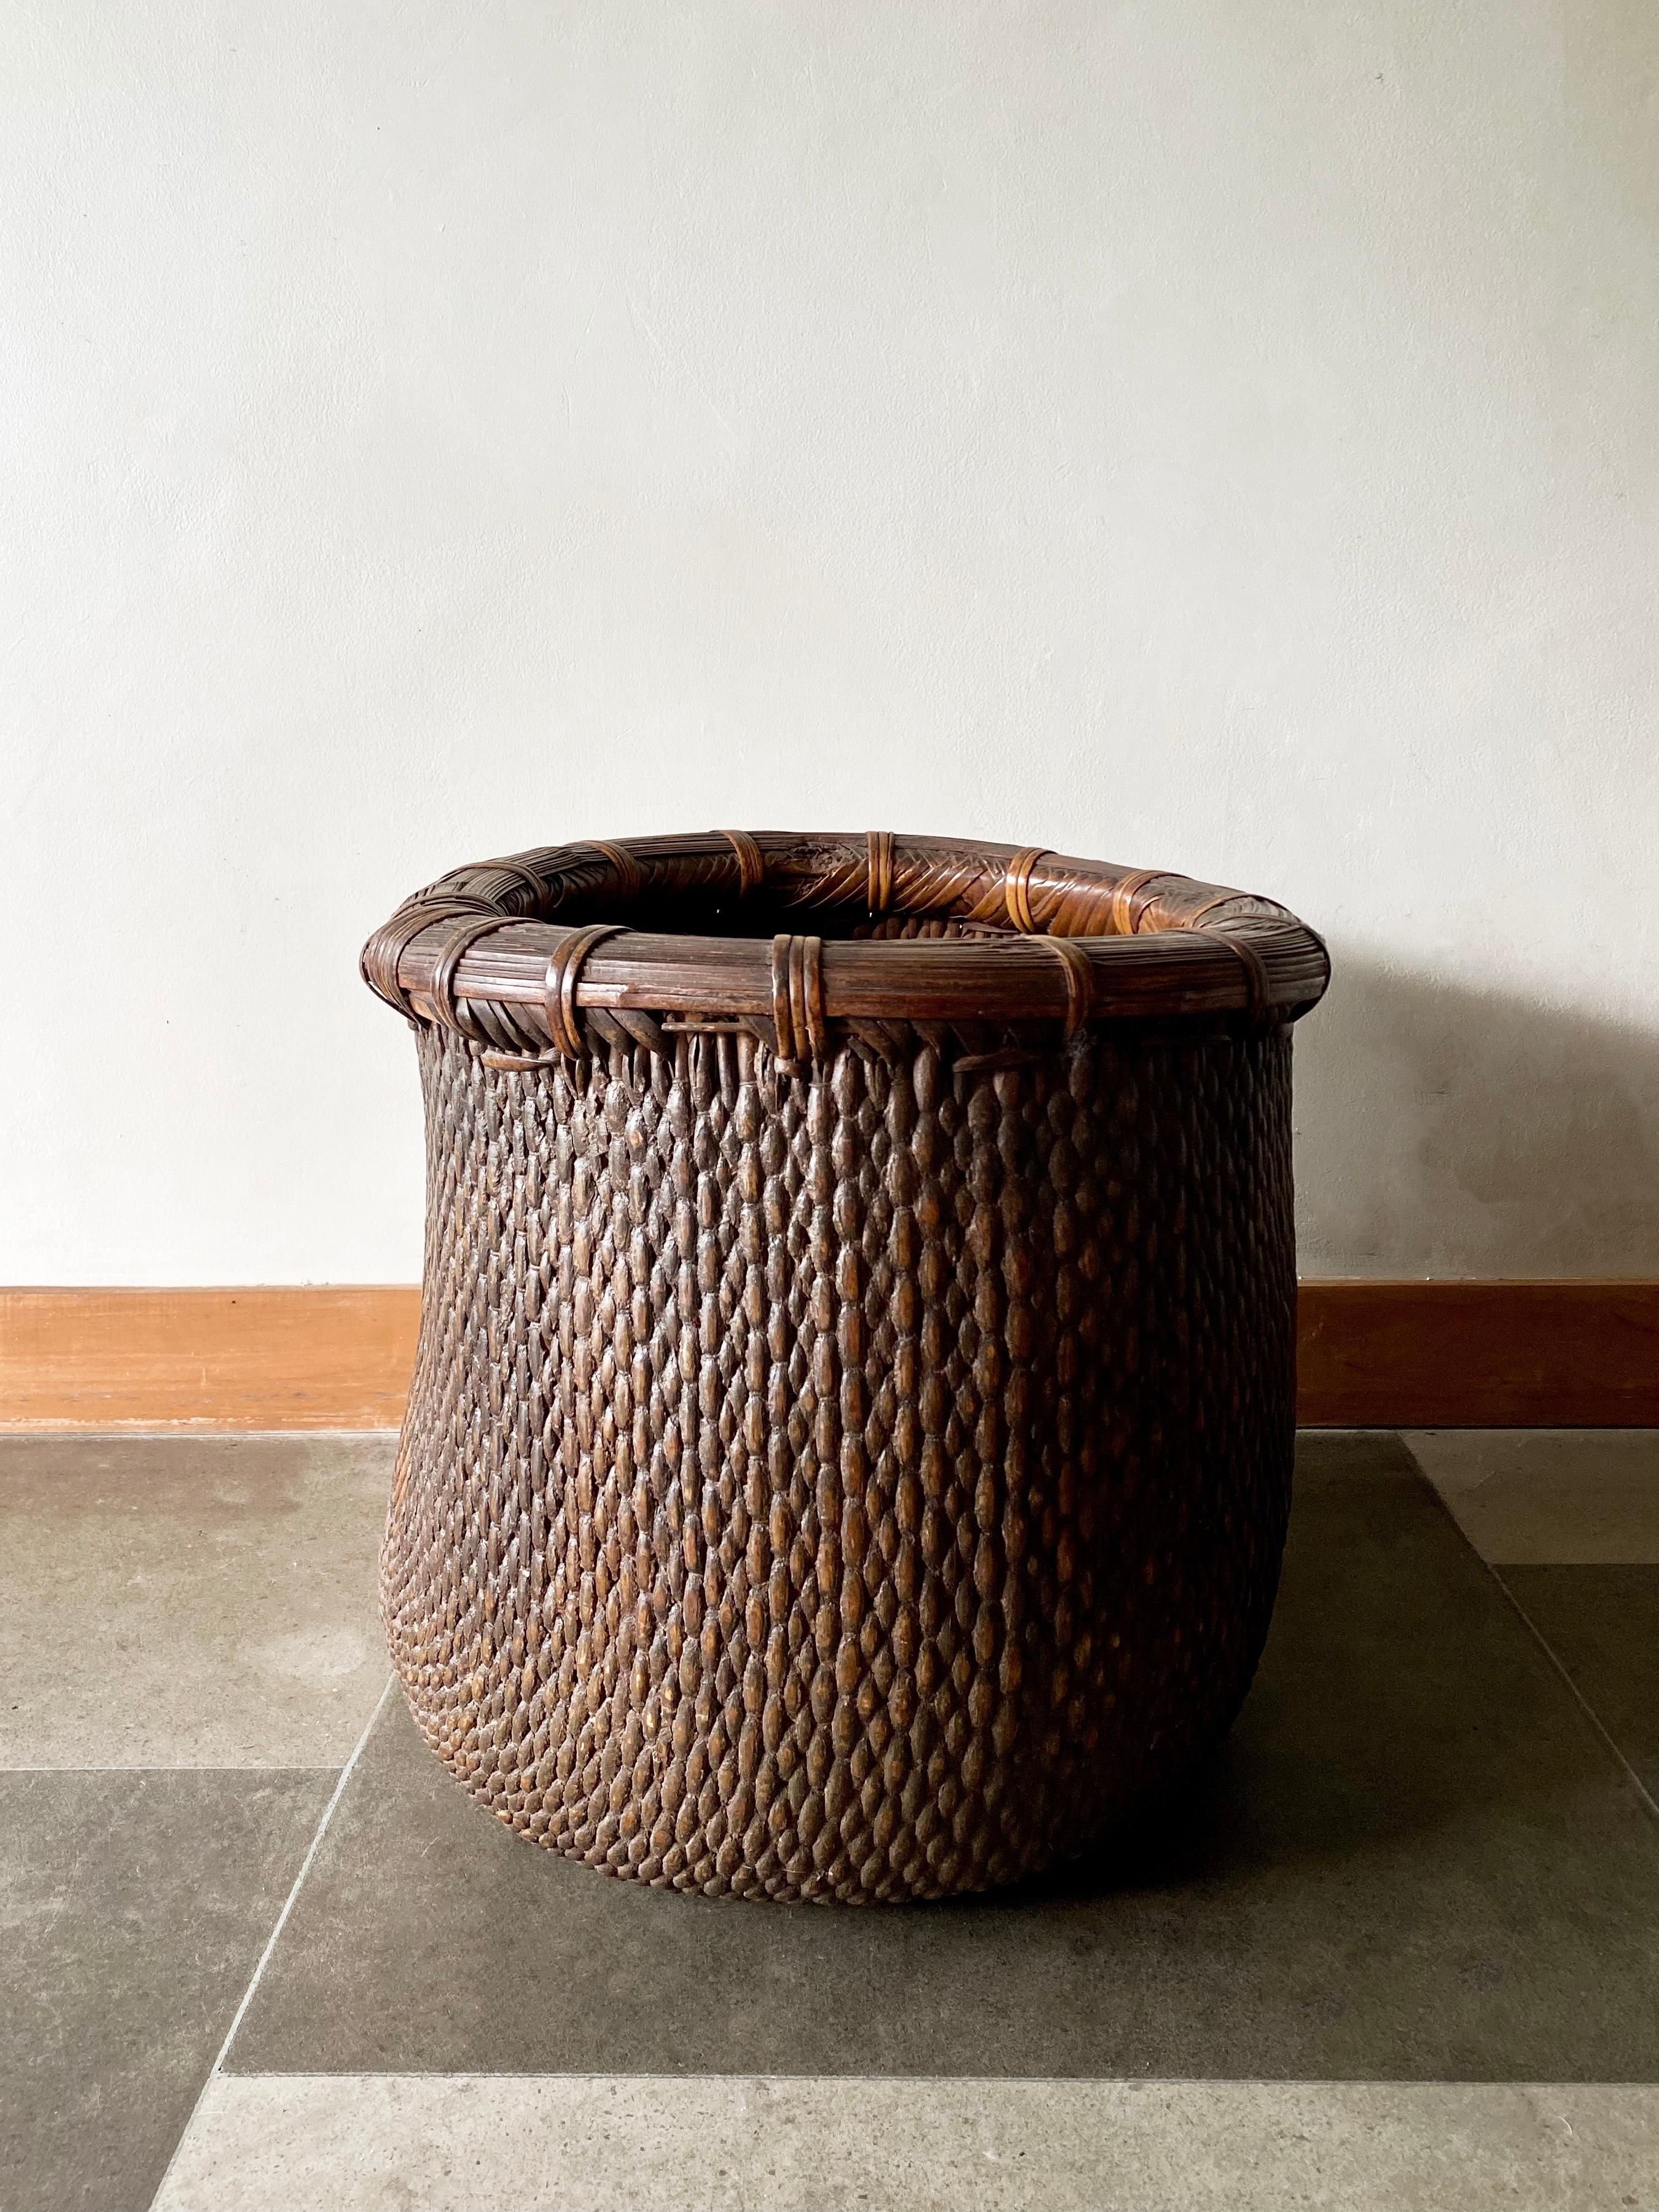 This basket is made from woven willow reeds, originating from China's Shanxi Provence it was used to carry grains. 

Dimensions: Height 42cm x Diameter 44cm.